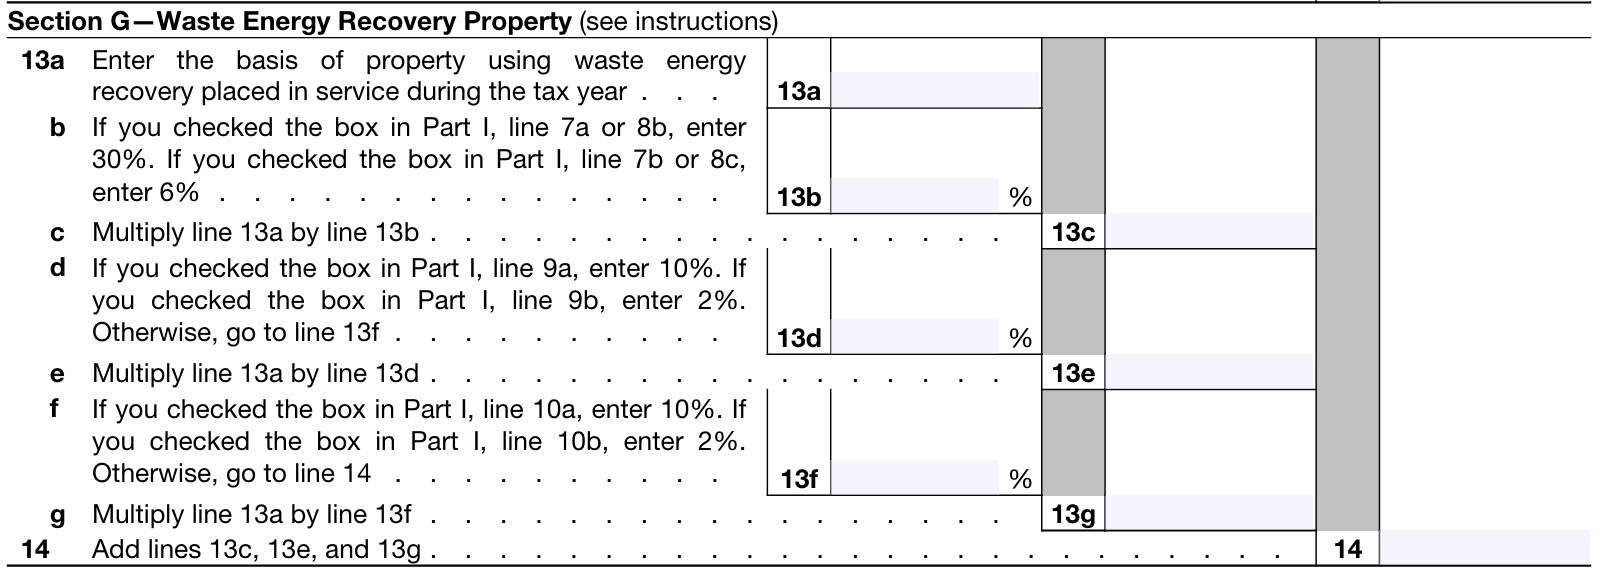 irs form 3468, part vi, section g: waste energy recovery property